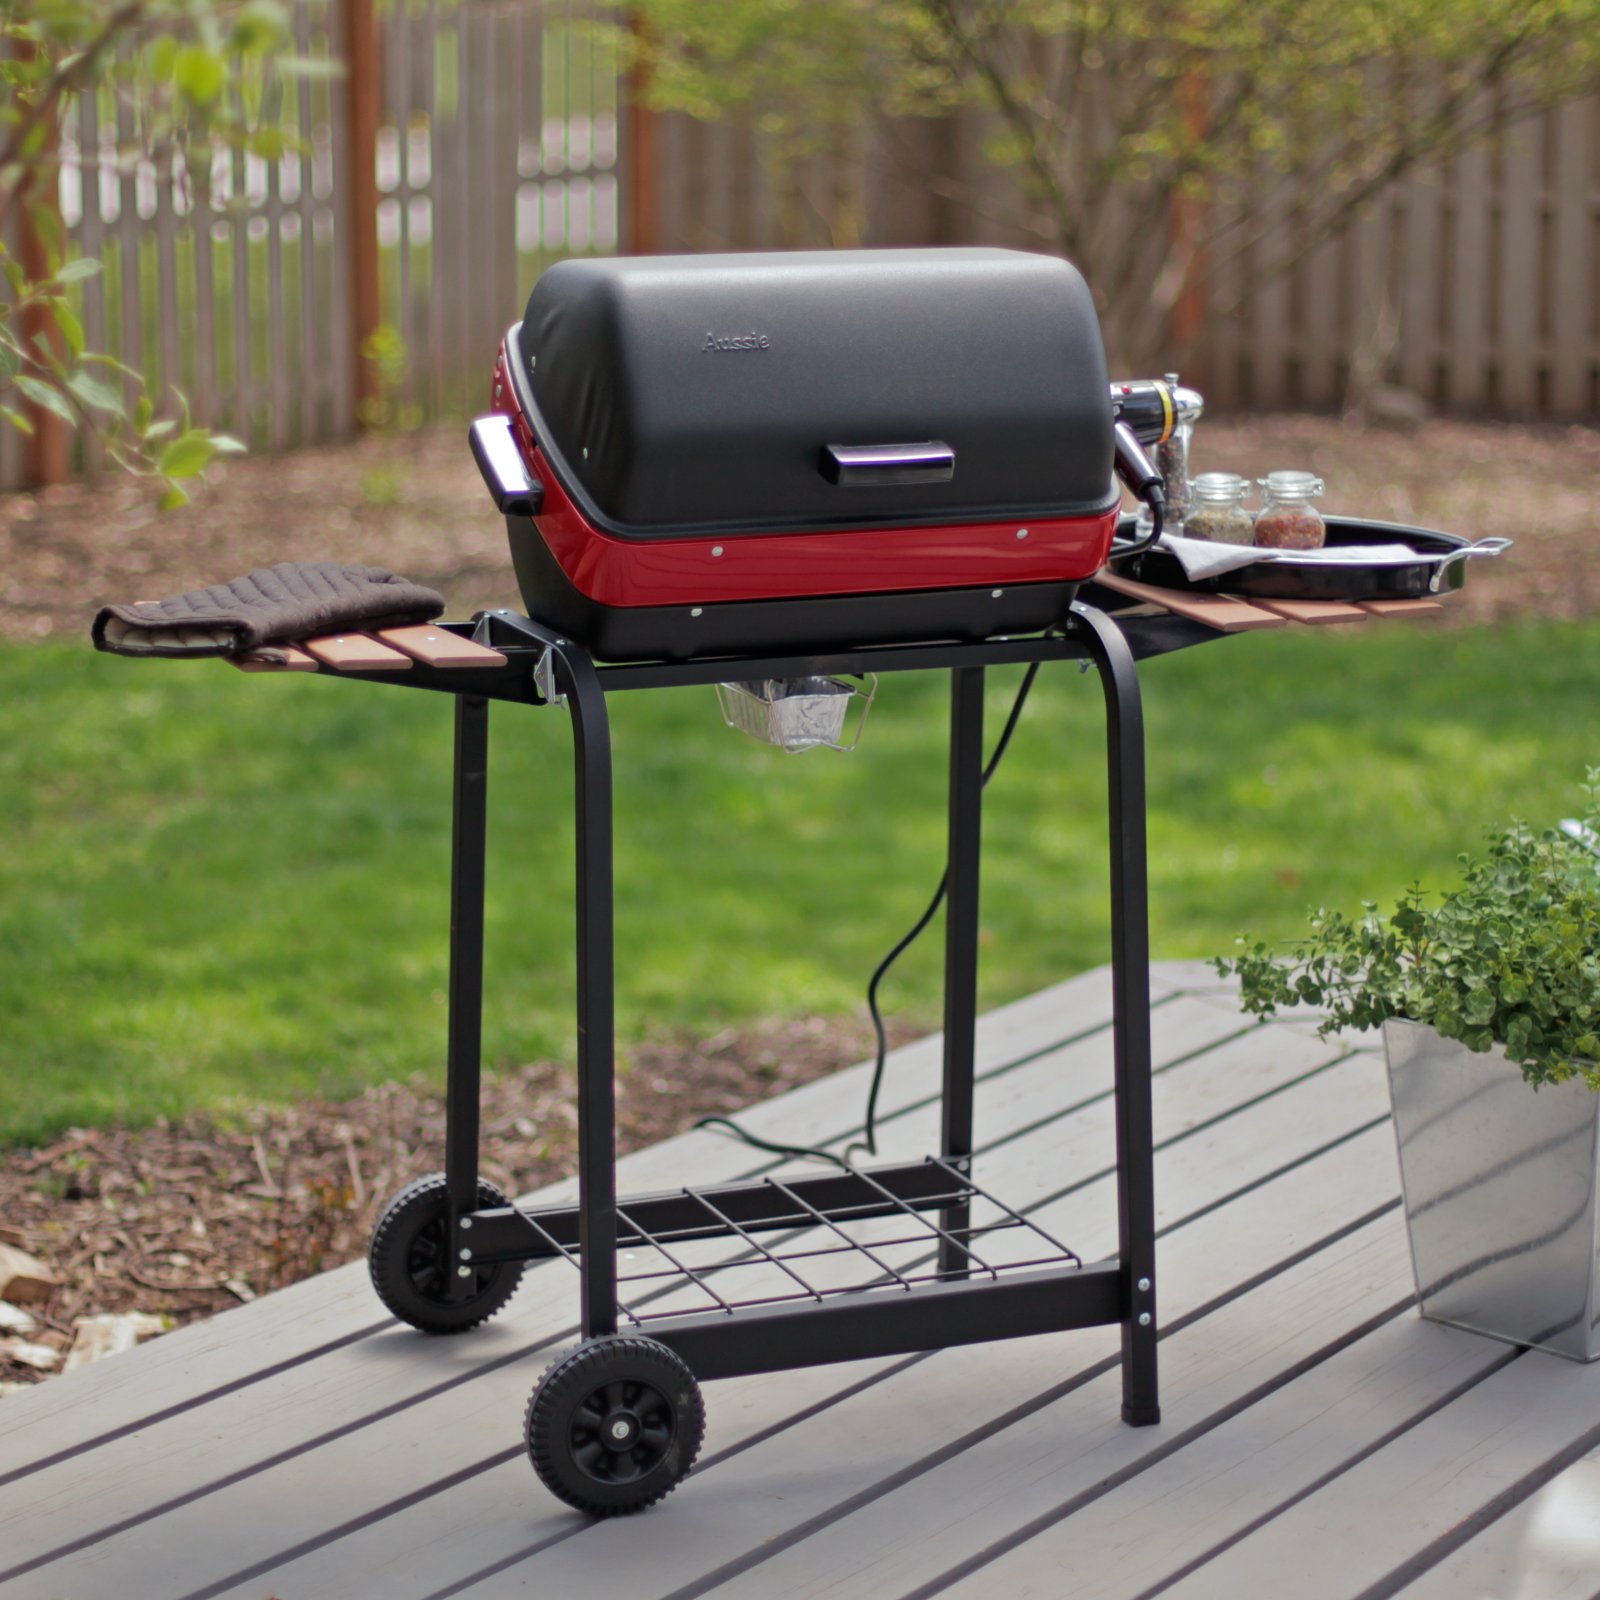 a 1500-Watt Electric Steel Cart Grill with Folding Side Tables - image 1 of 10